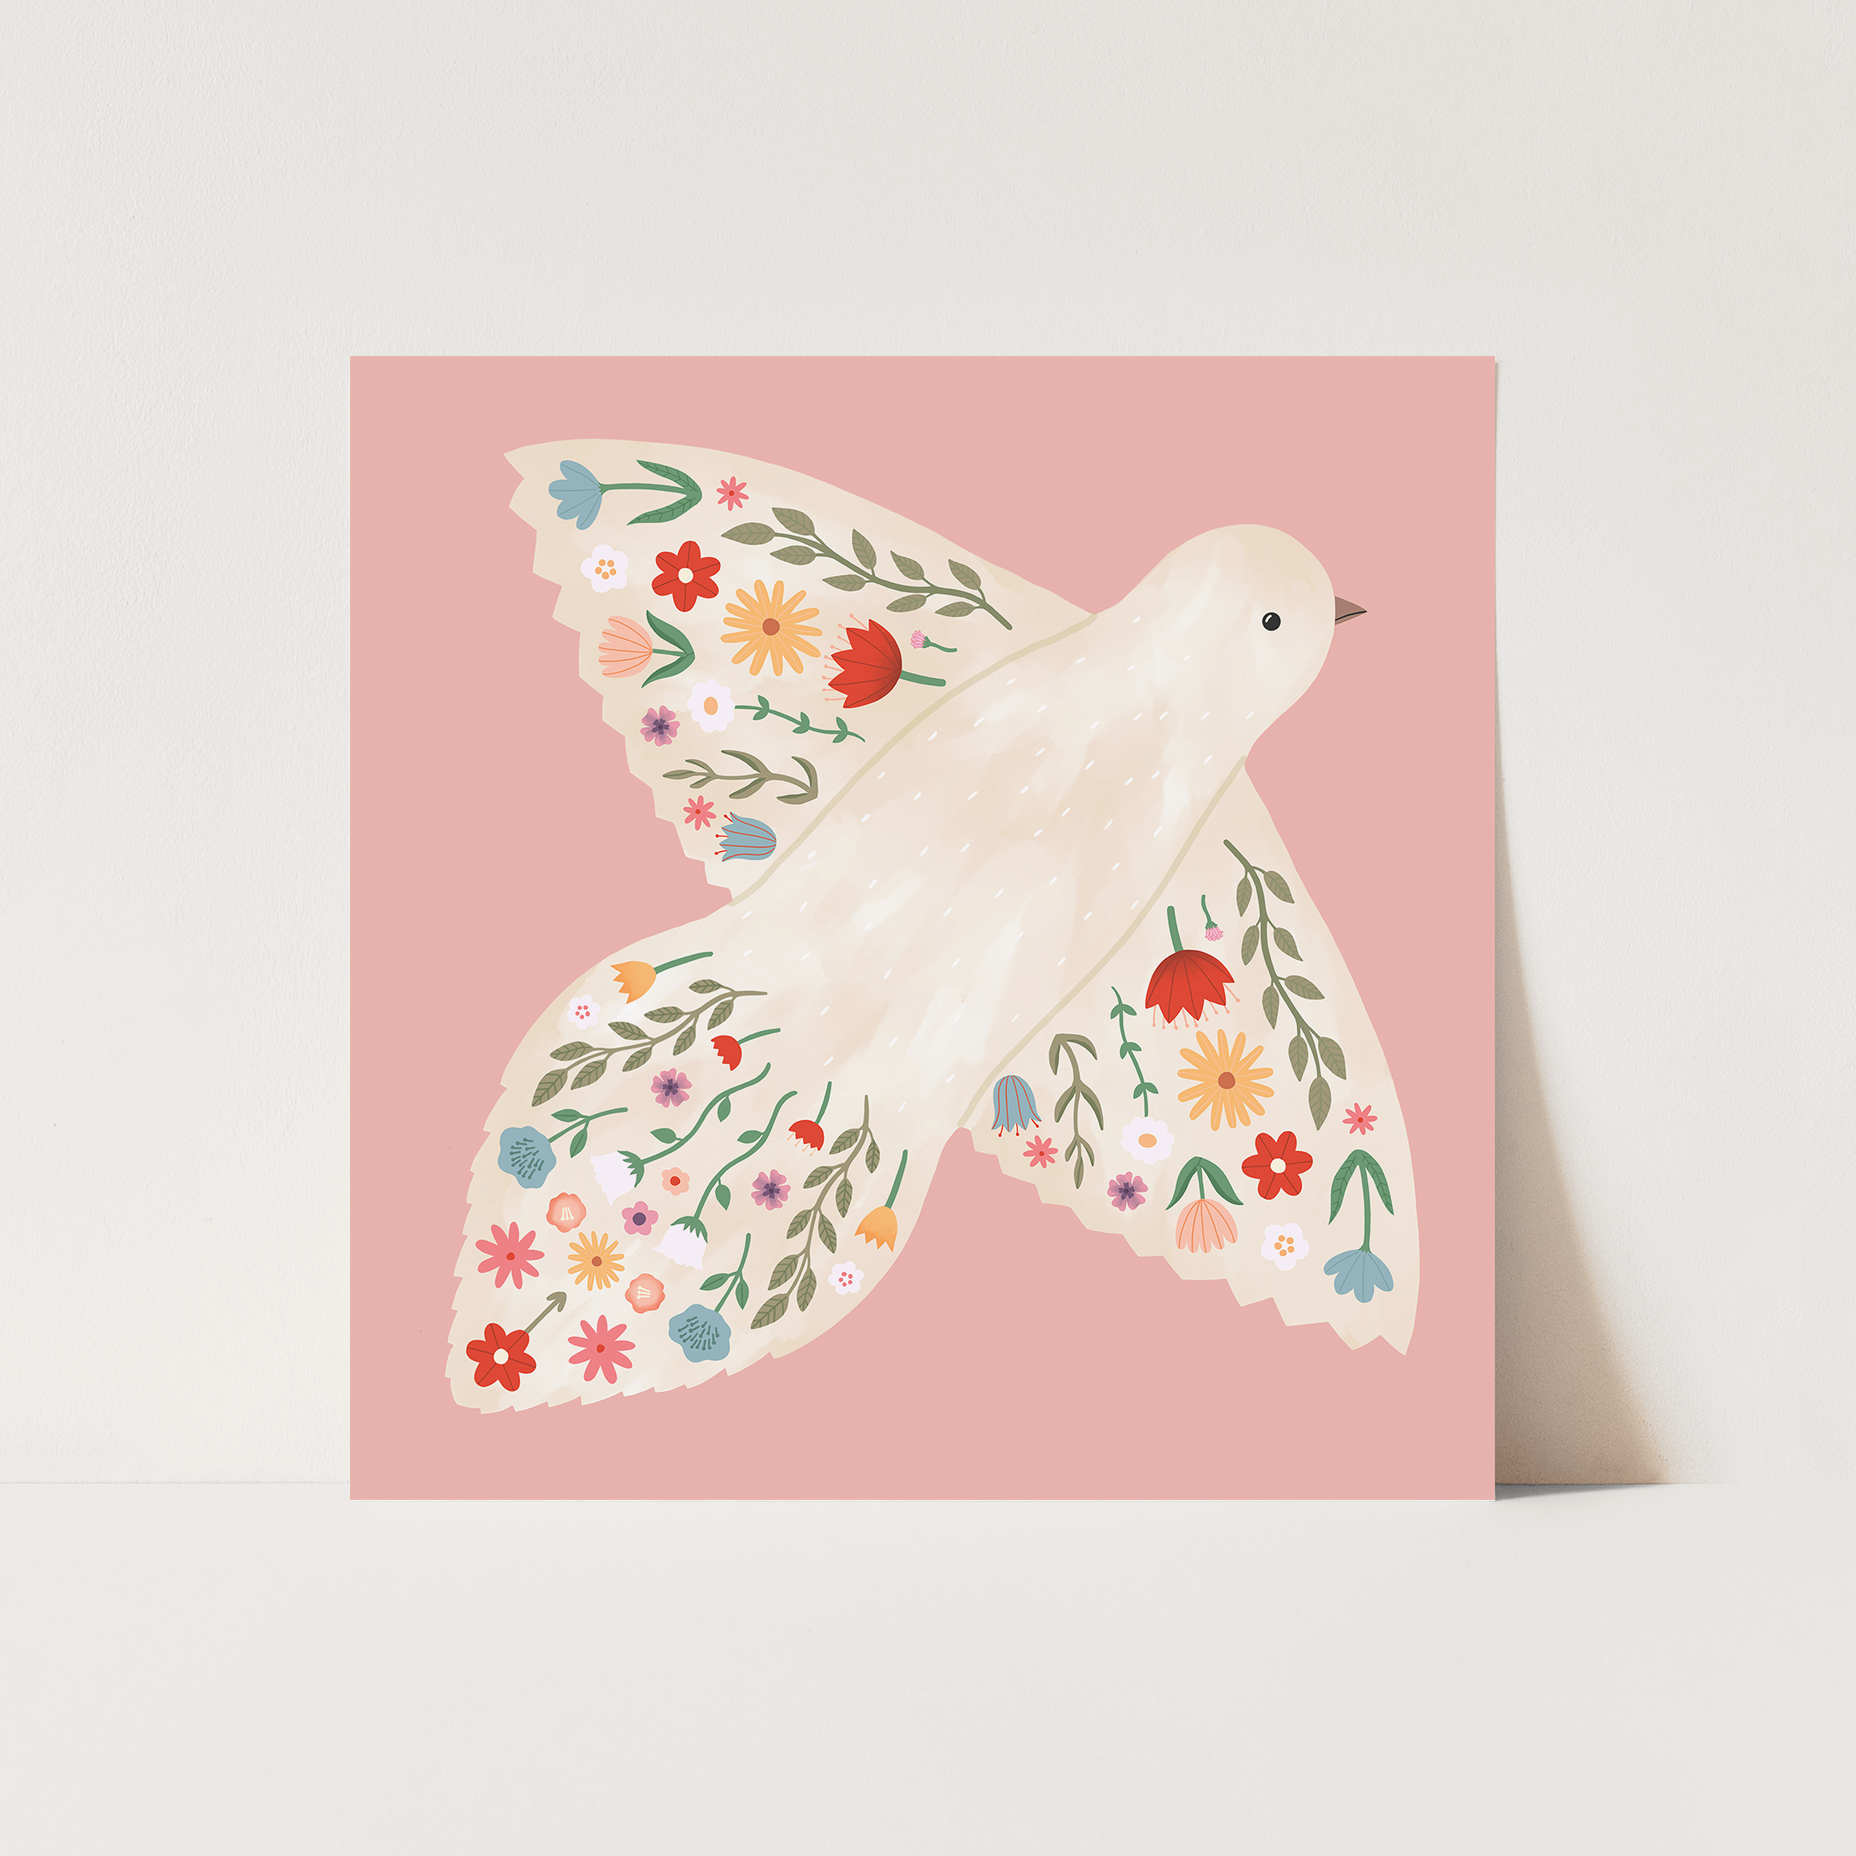 Floral Dove Art Print In Pink by Kid of the Village (2 Sizes Available)